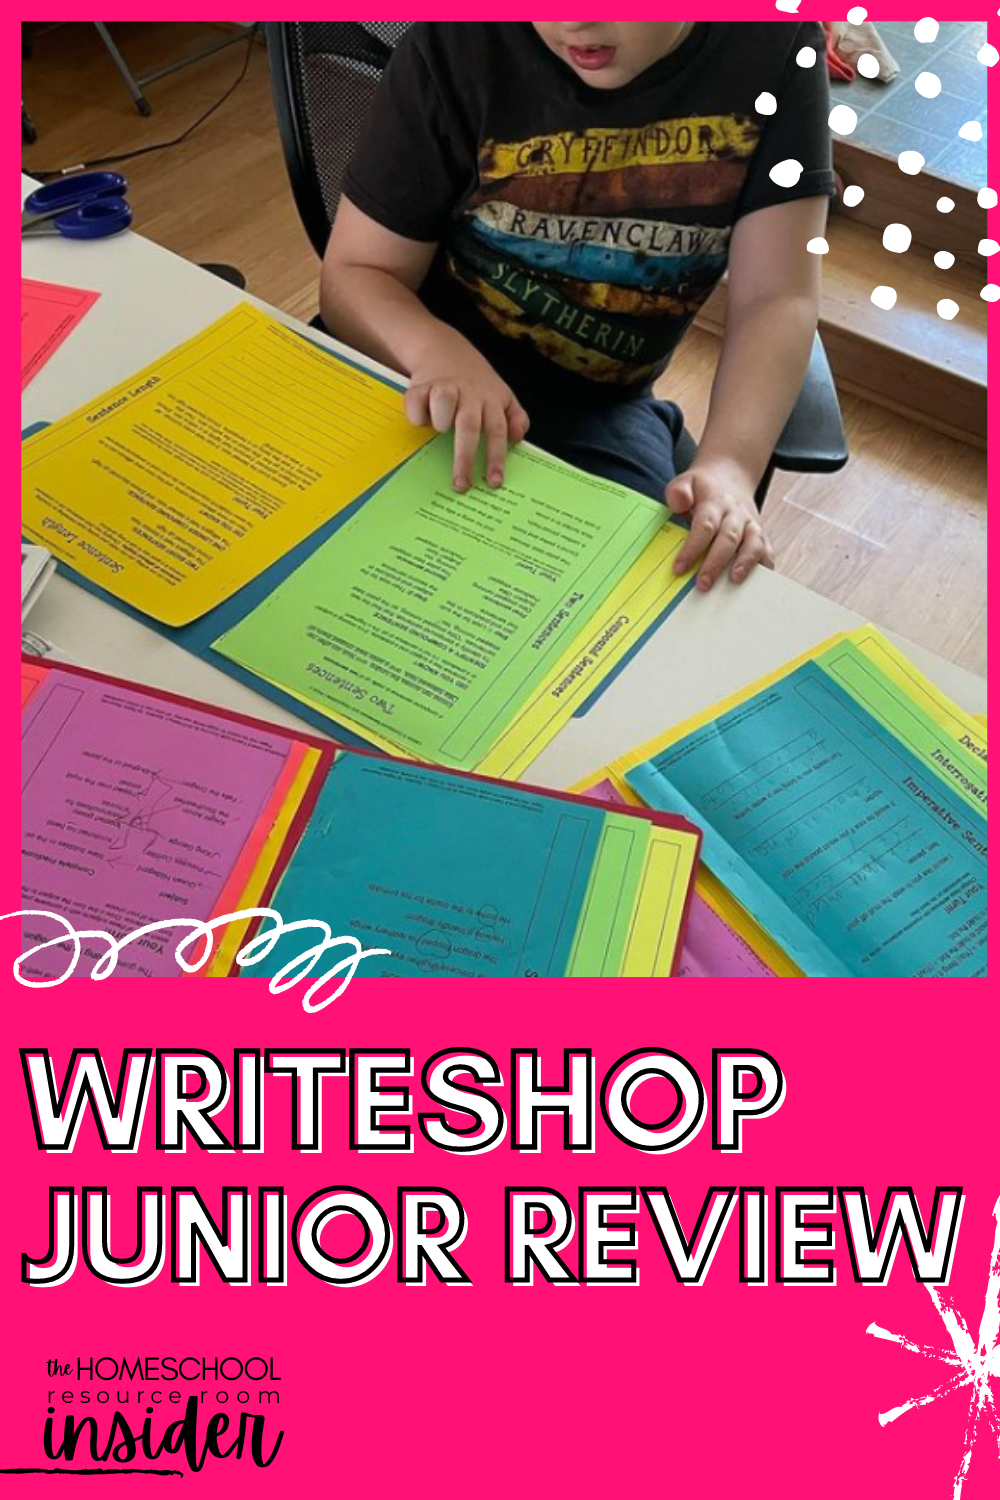 WriteShop Review: Our year-end review of WriteShop Junior, a thorough and easy-to-use program that got my son EXCITED about writing. A first for us!!!